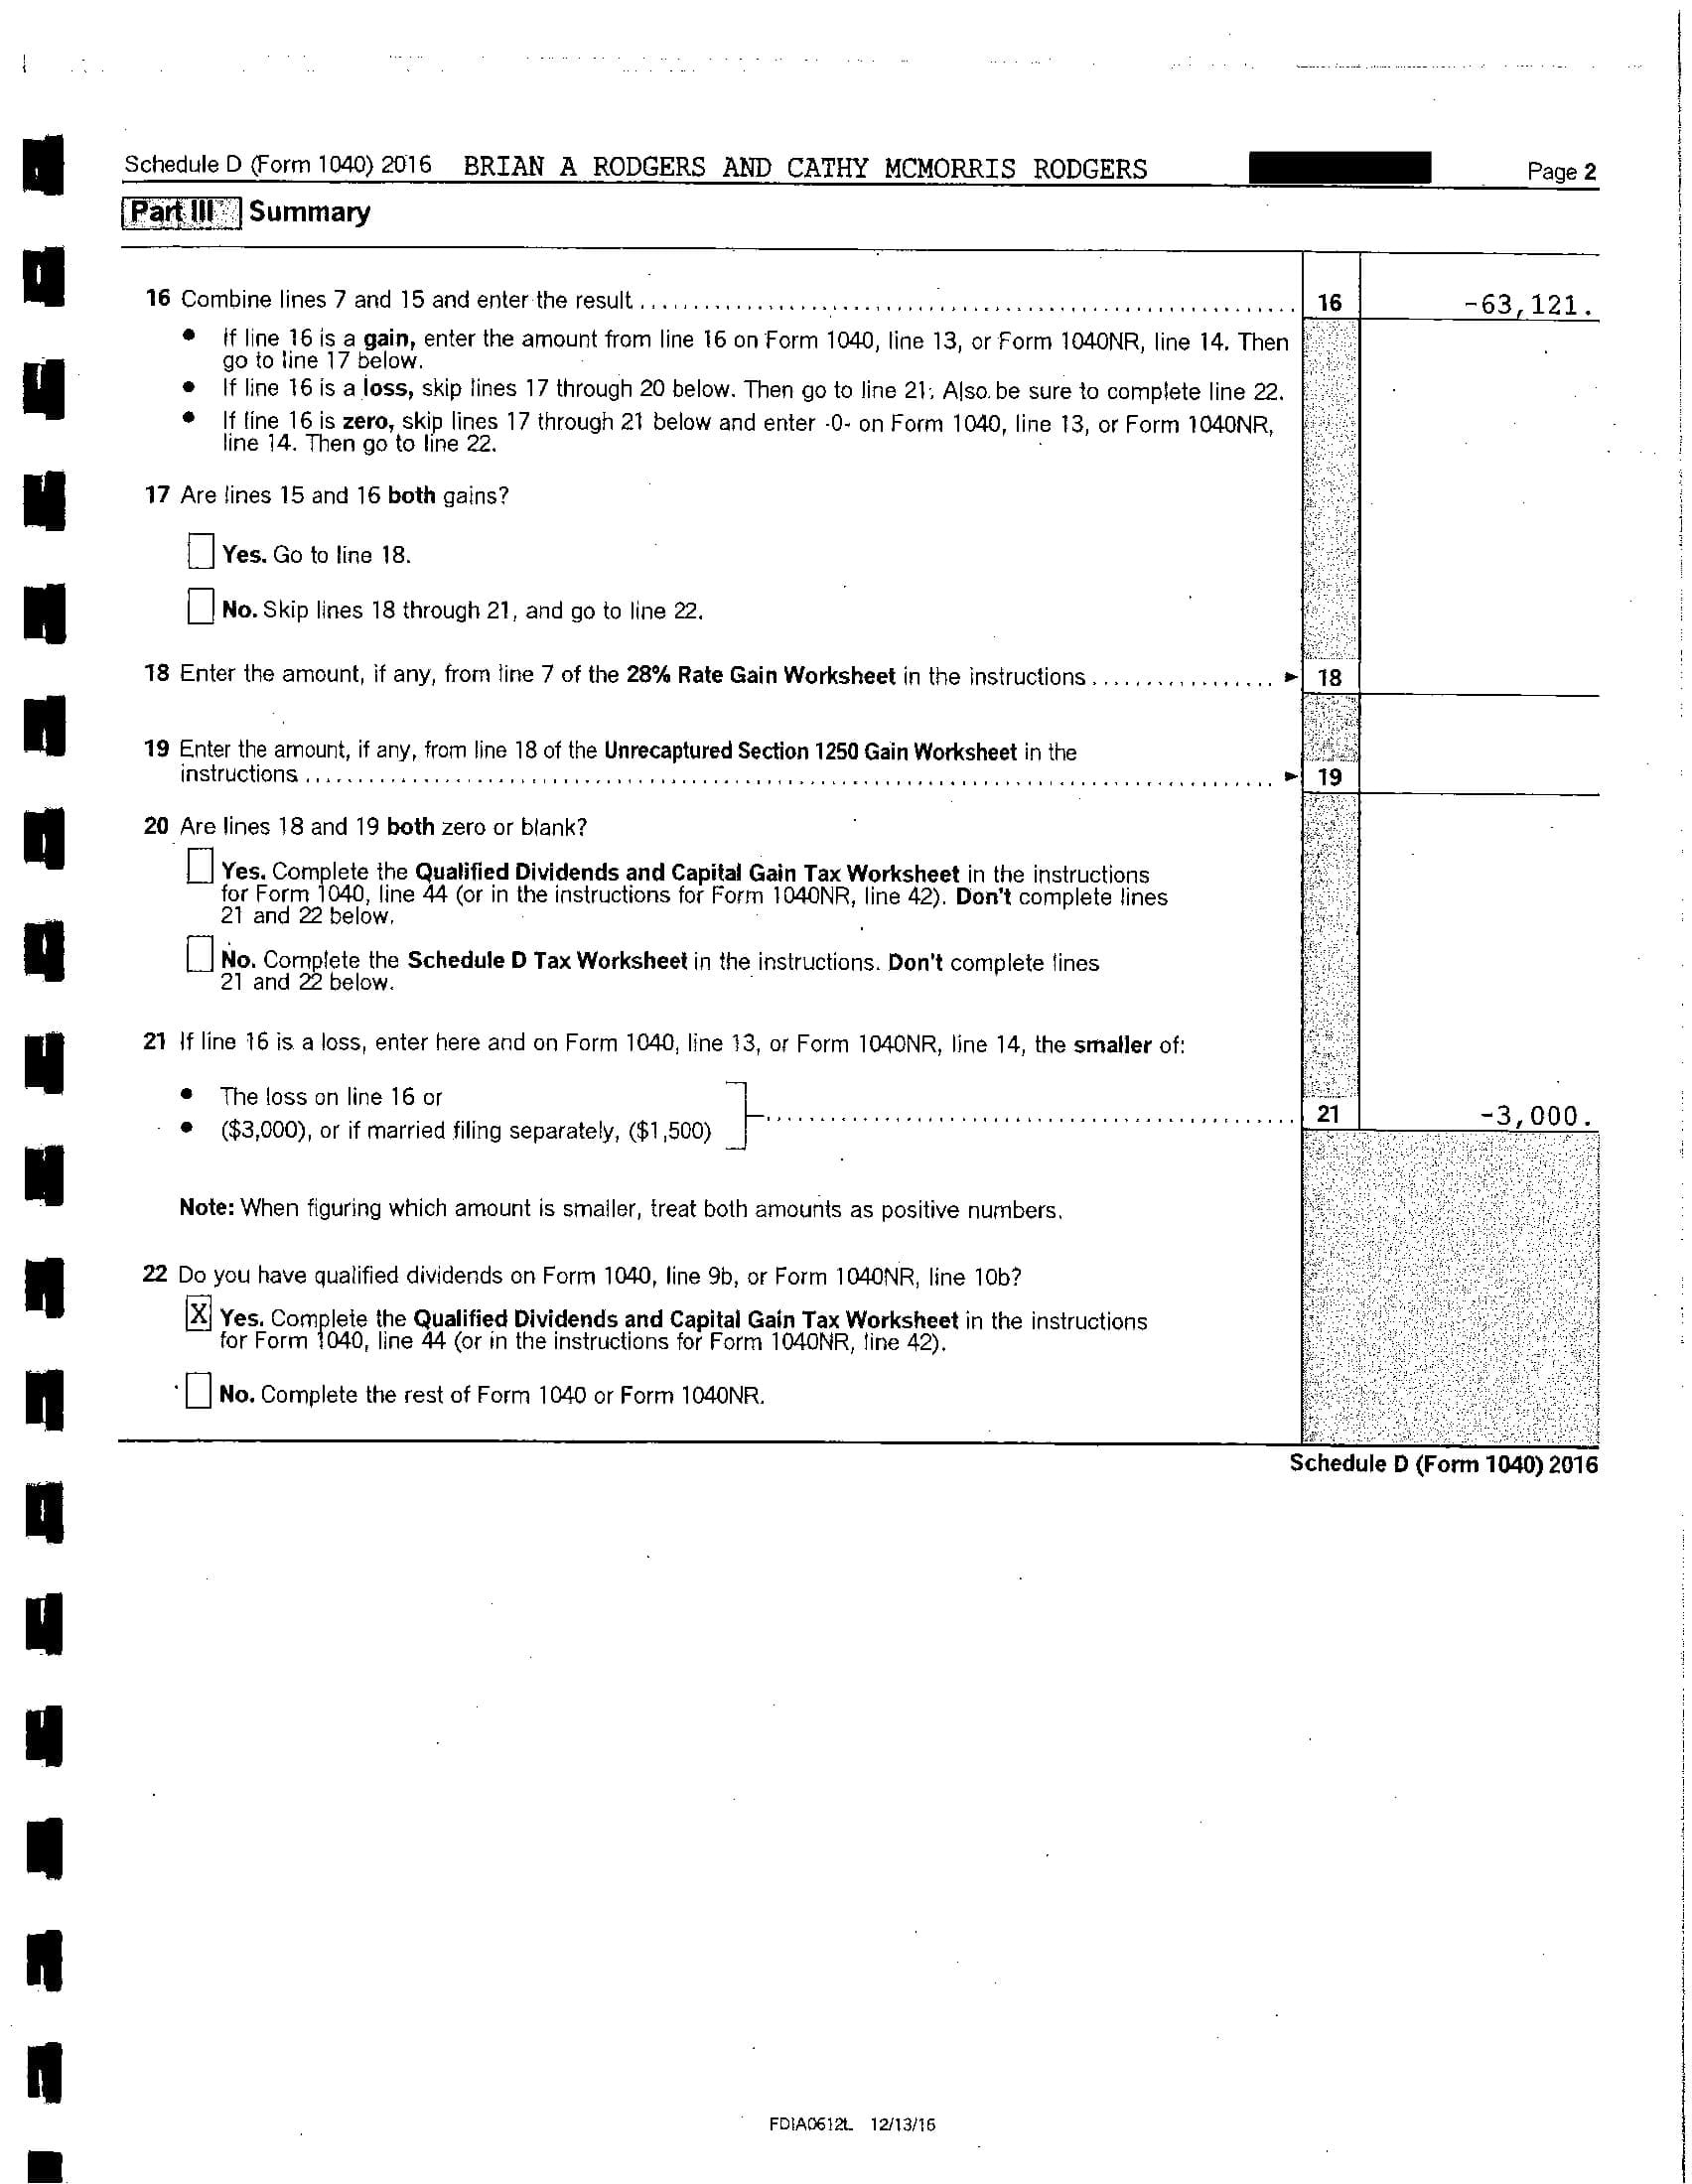 Federal Income Tax Rates For 28 Rate Gain Worksheet 2016 Popular Or 28 Rate Gain Worksheet 2016